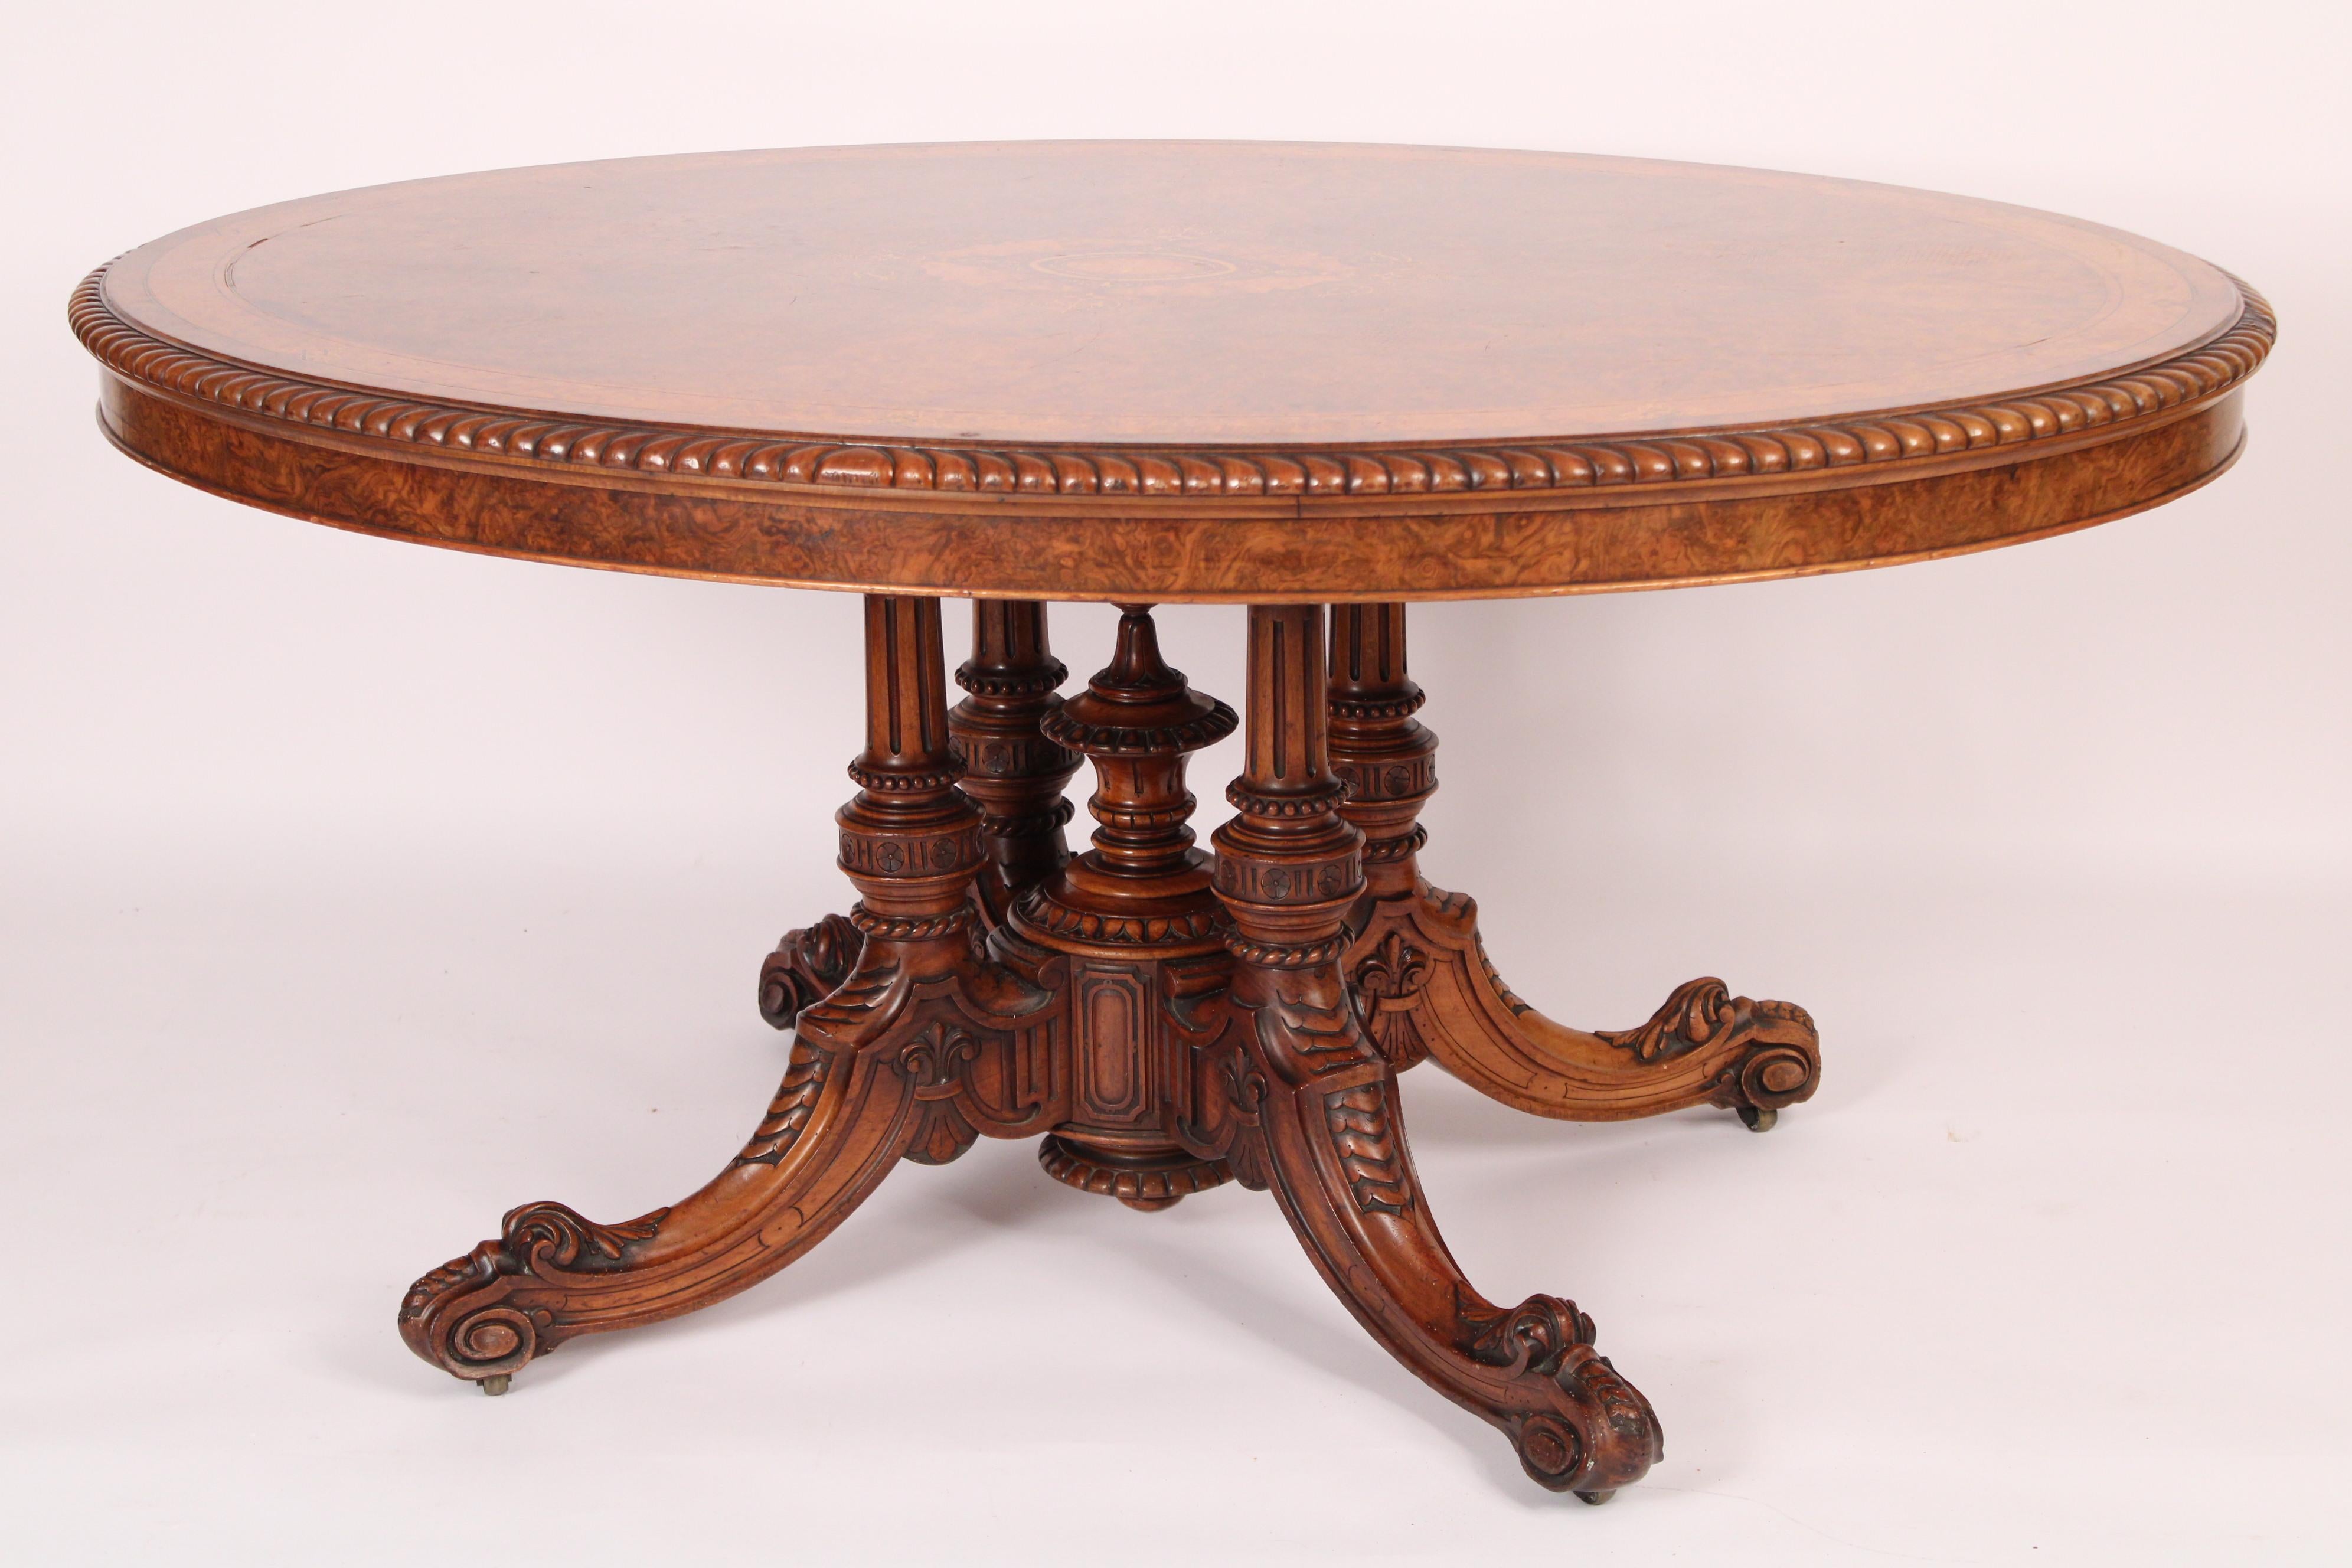 English Victorian burl walnut and carved walnut loo table, late 19th table. With an oval burl walnut inlaid top with gadrooned borders, 4 turned fluted columns attached to 4 carved down swept legs. The quality of woods and workmanship that went into